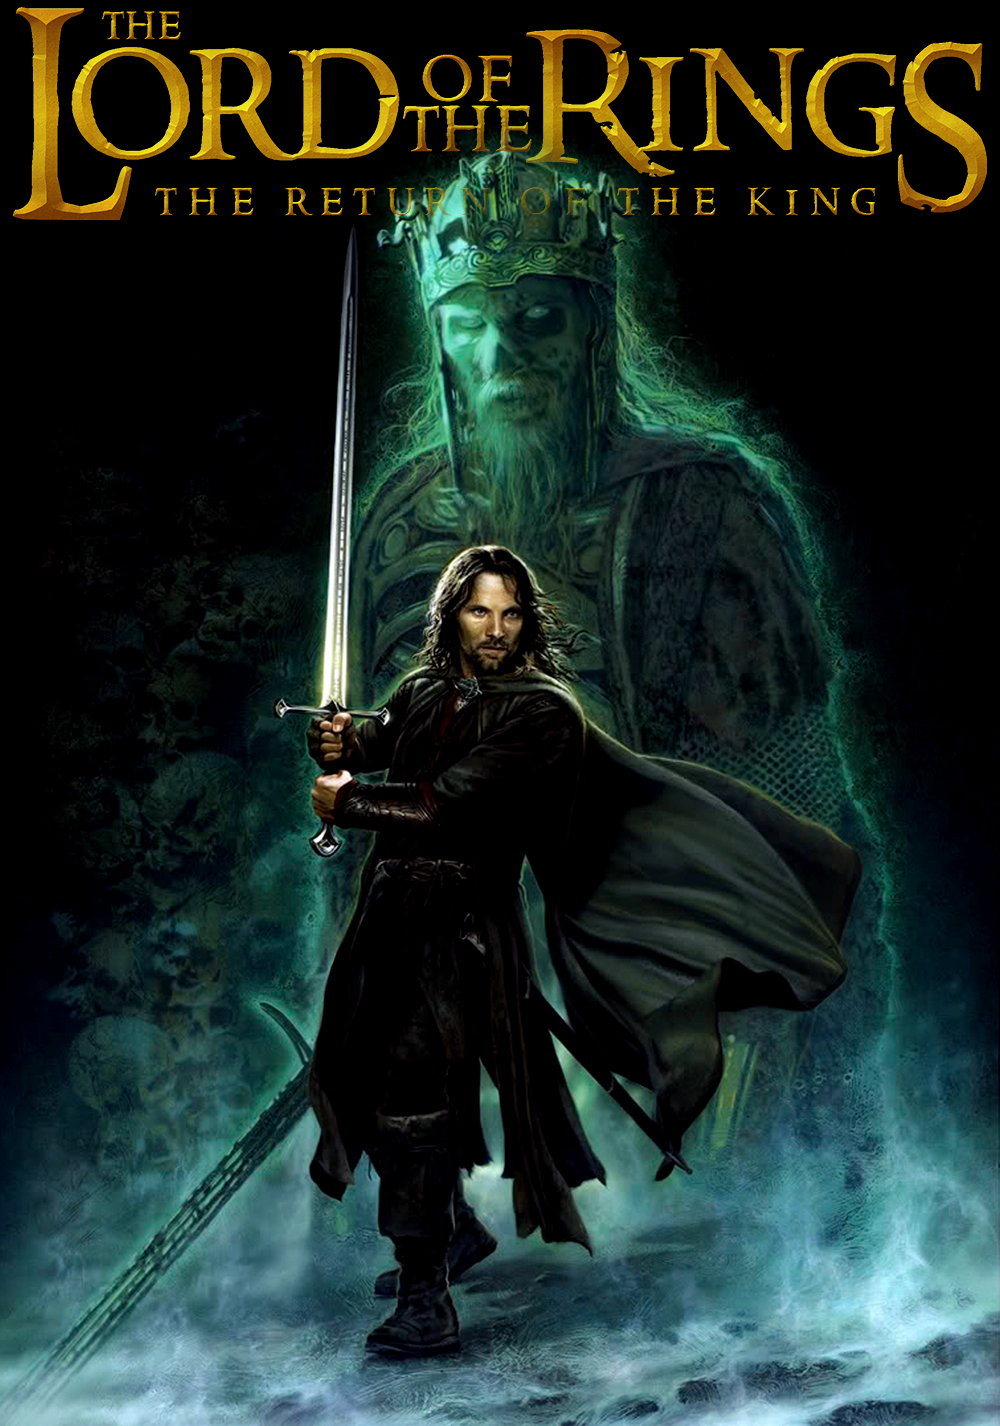 The Lord of the Rings: The Return of download the last version for windows